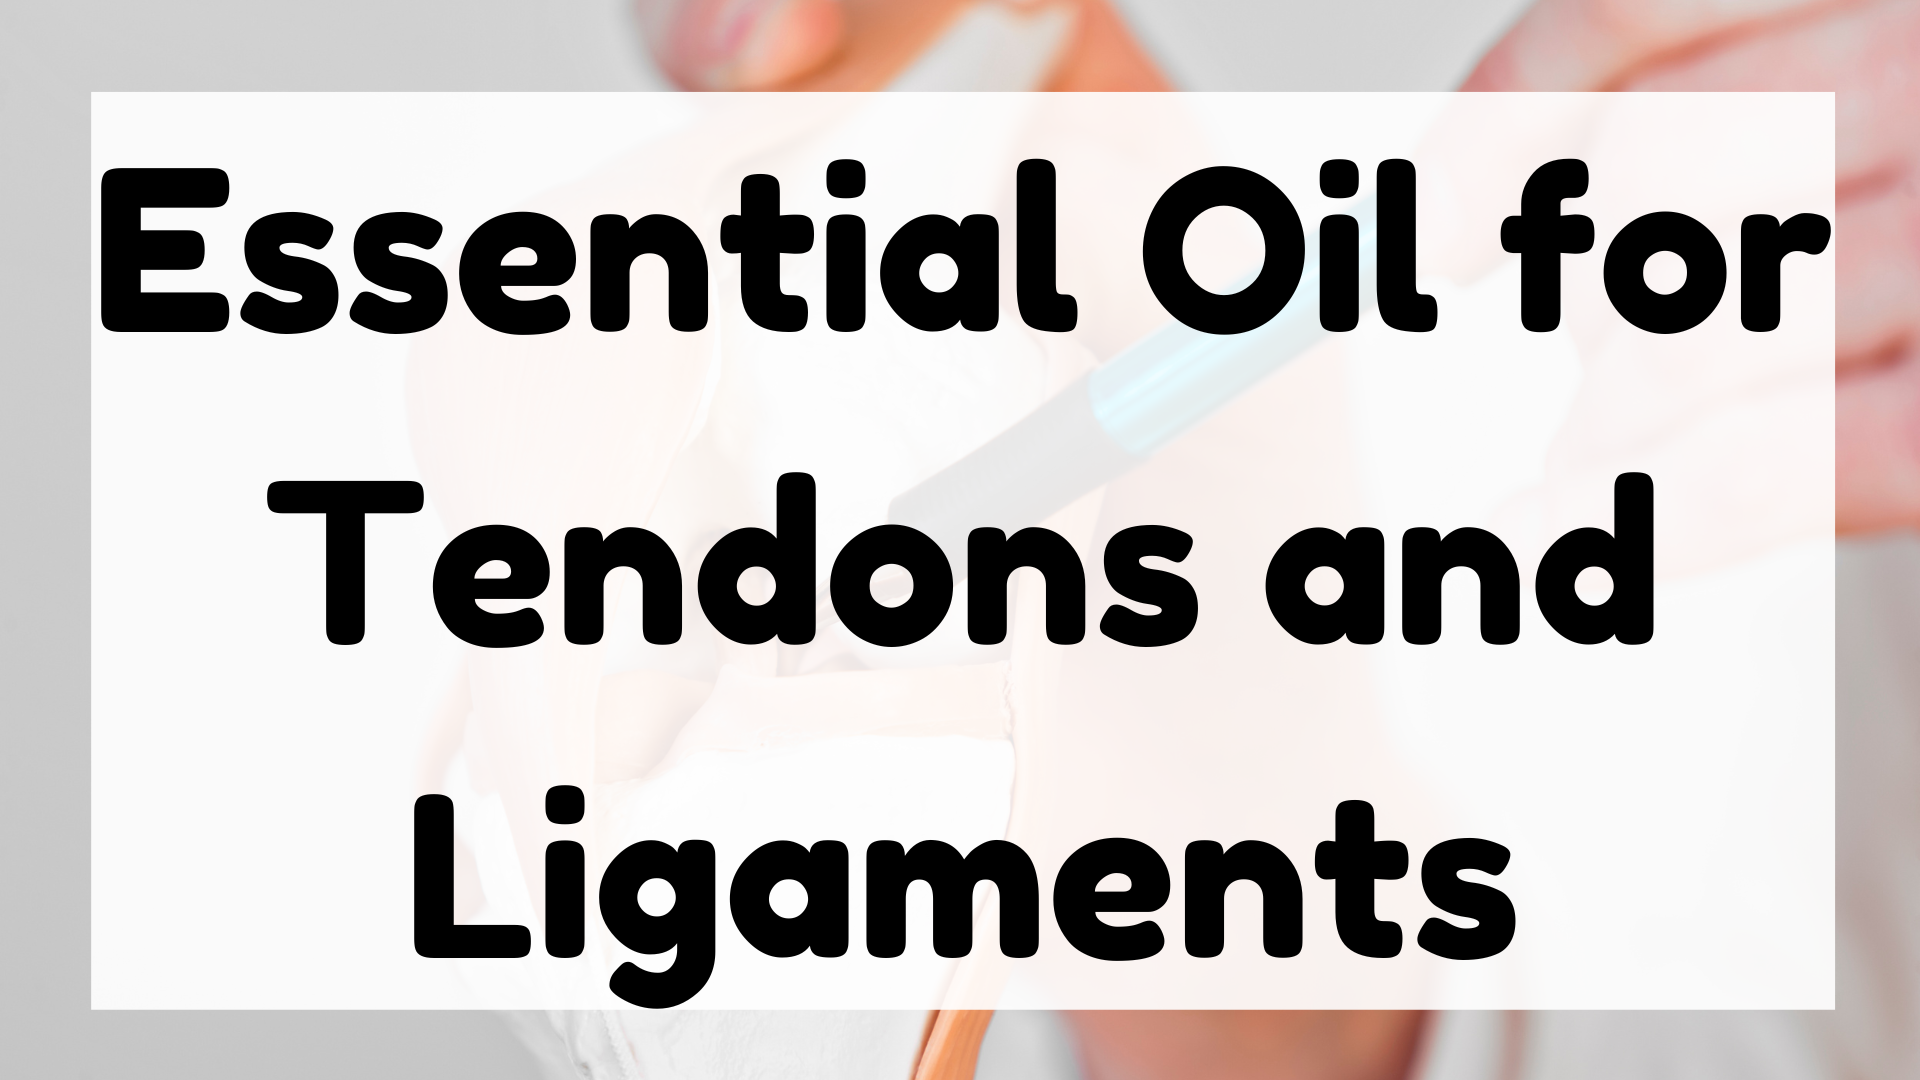 Essential Oil for Tendons and Ligaments featured image